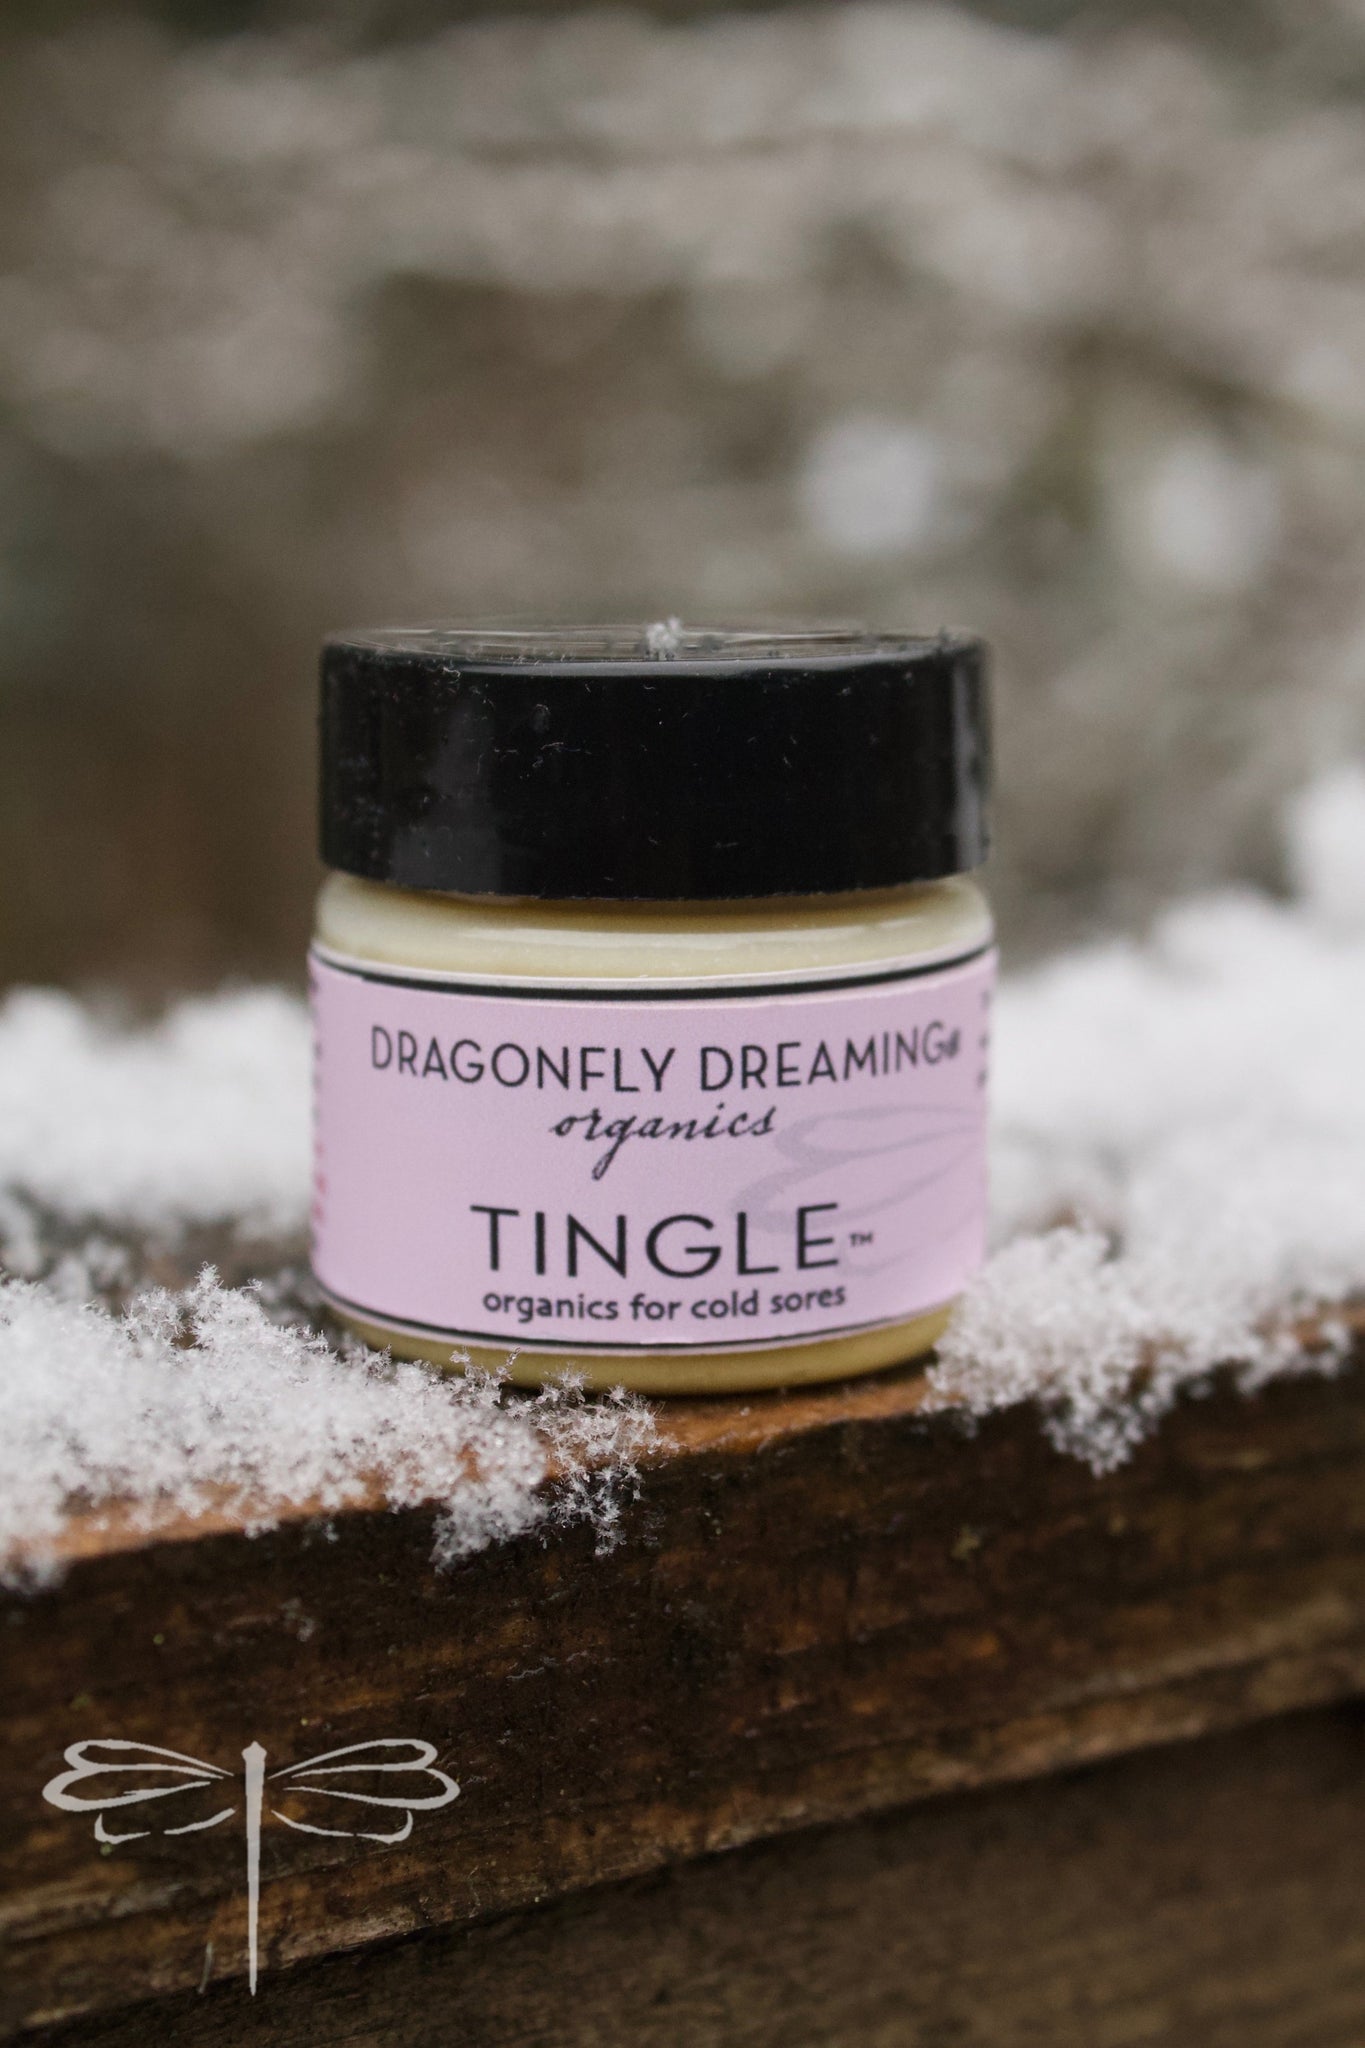 Dragonfly Dreaming® Tingle! Organics for Cold Sores™